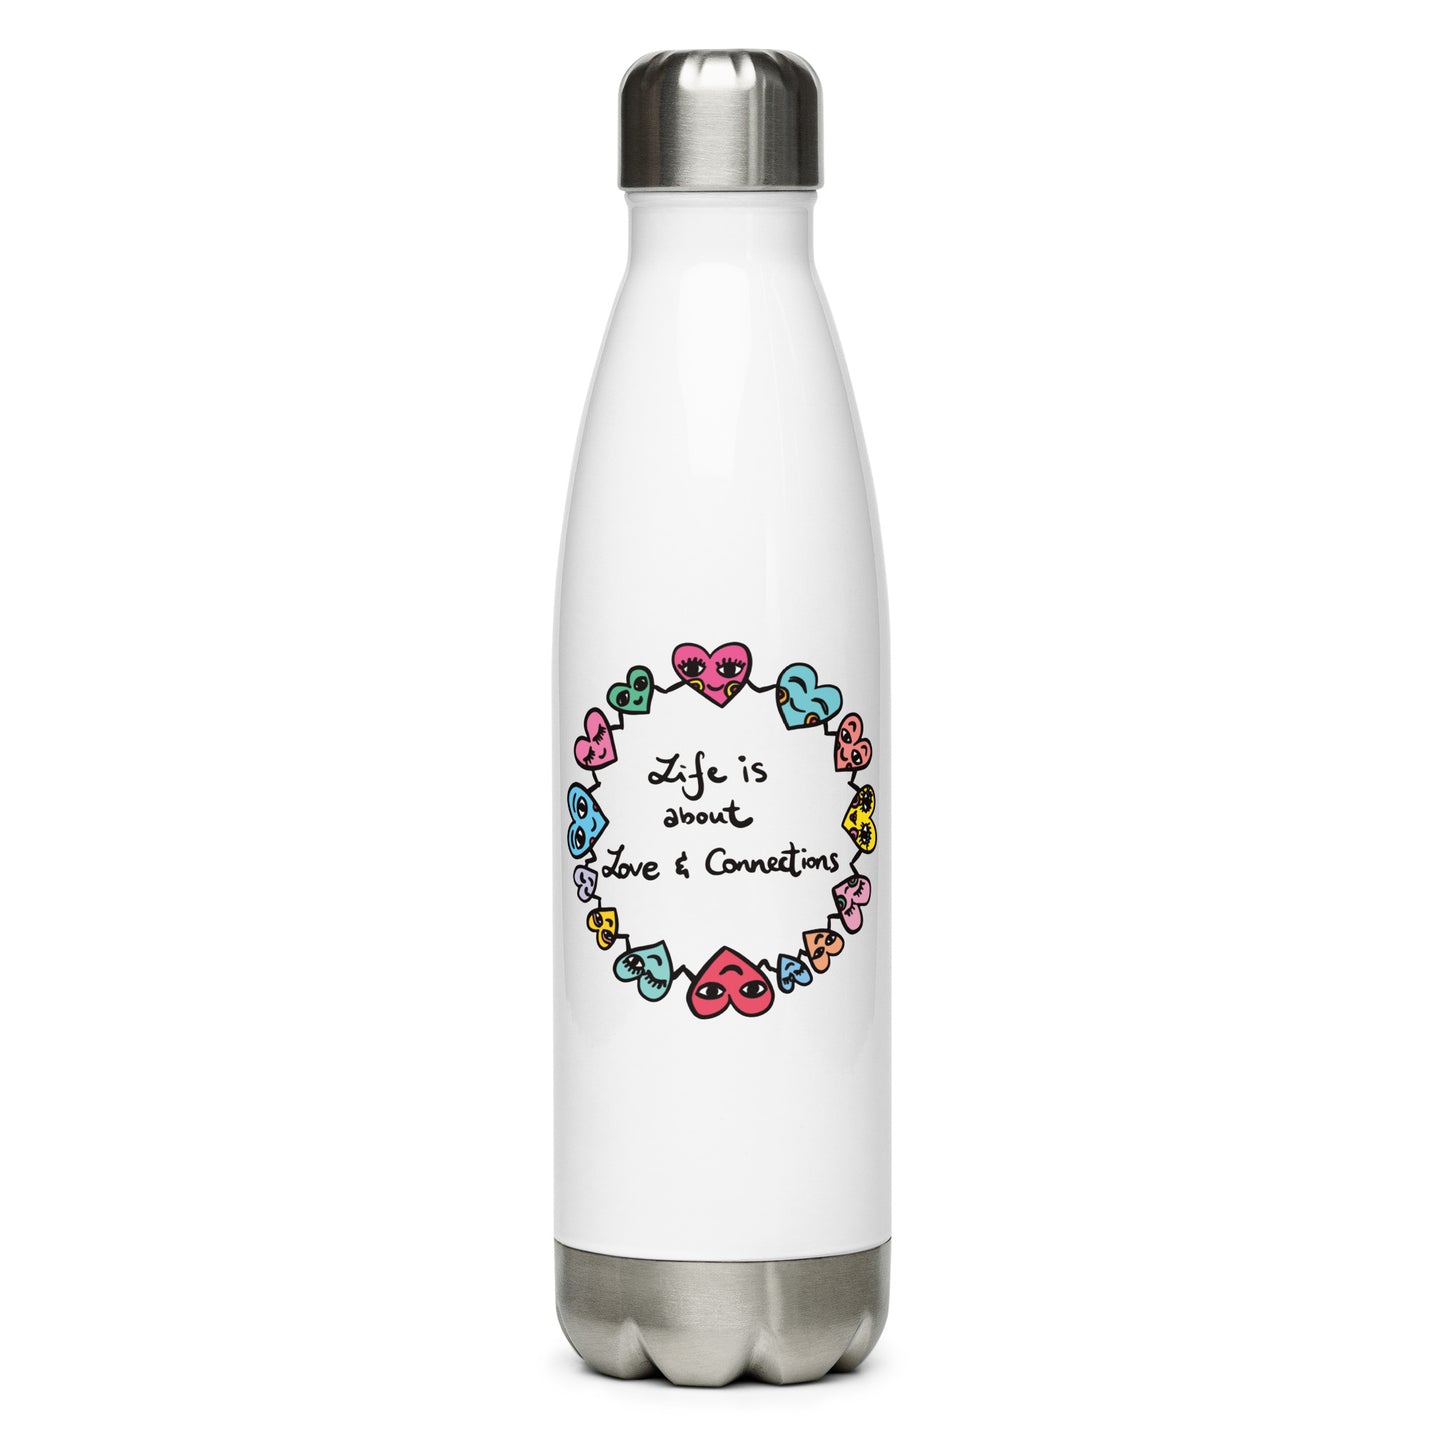 "Life is about Love & Connections" Stainless Steel Water Bottle